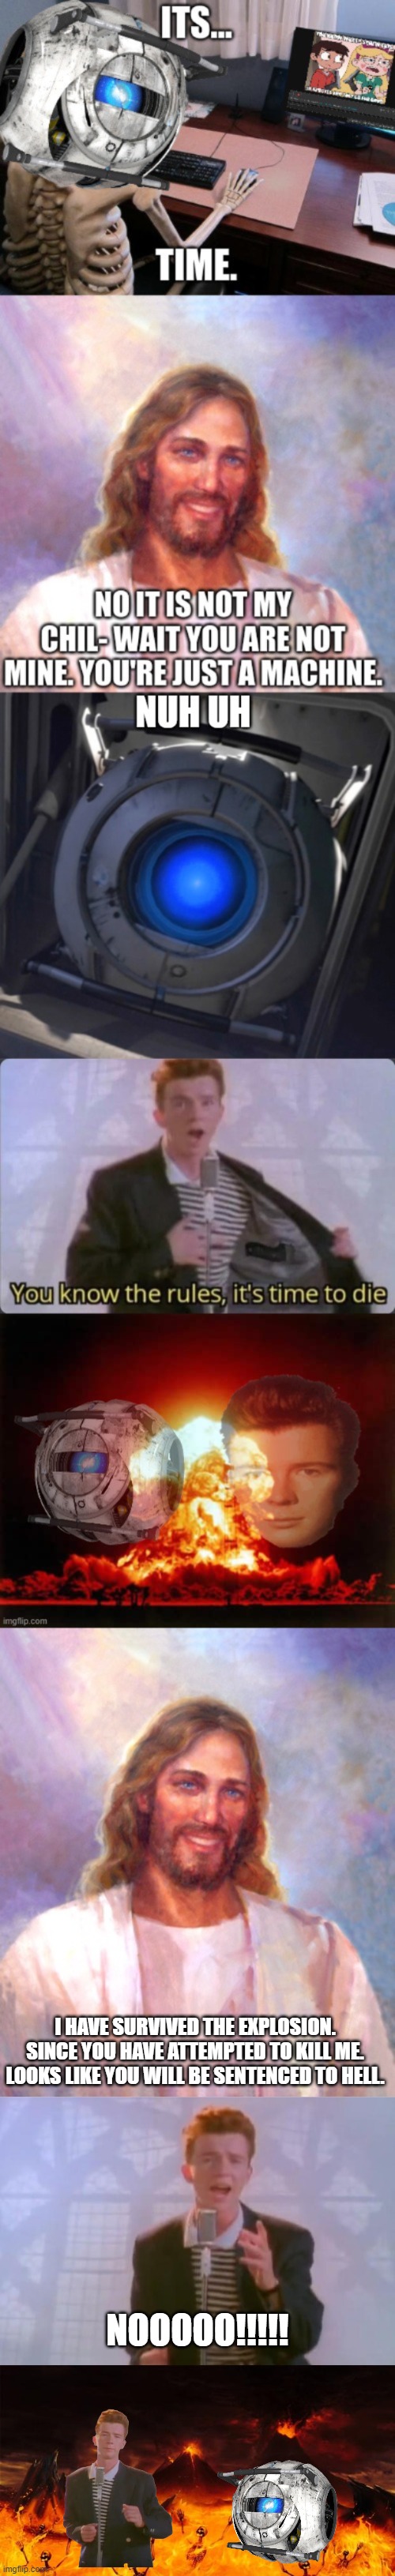 Don't, Ever, Offend, My Religion, ever, AGAIN!!!! | I HAVE SURVIVED THE EXPLOSION. SINCE YOU HAVE ATTEMPTED TO KILL ME. LOOKS LIKE YOU WILL BE SENTENCED TO HELL. NOOOOO!!!!! | image tagged in memes,smiling jesus,rick astley,hell | made w/ Imgflip meme maker